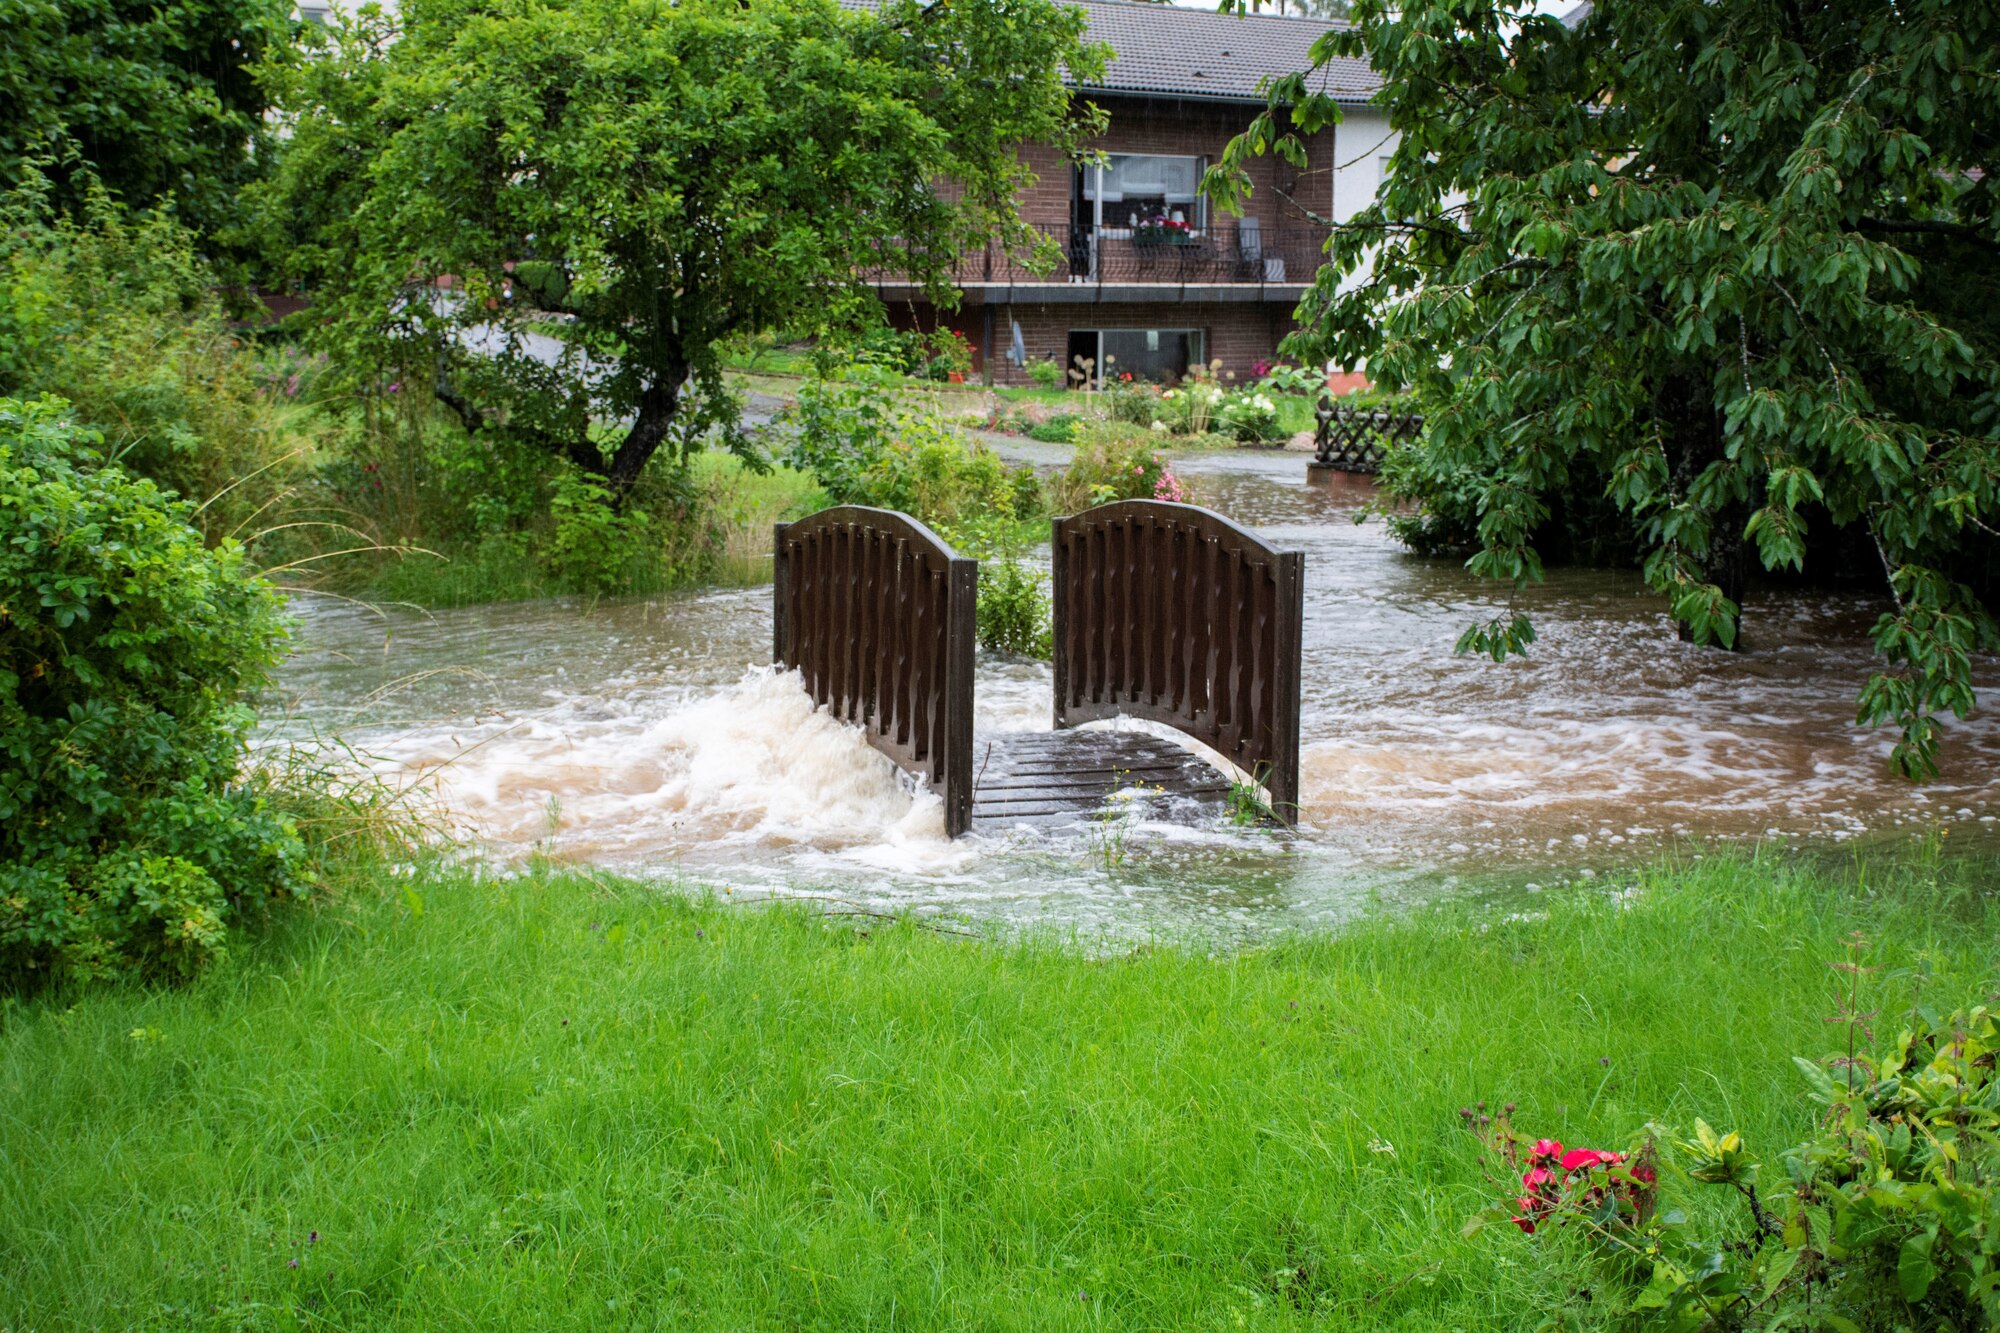 Water surges in the village of Binsfeld, Germany, near Spangdahlem Air Base, Germany, July 14, 2021.